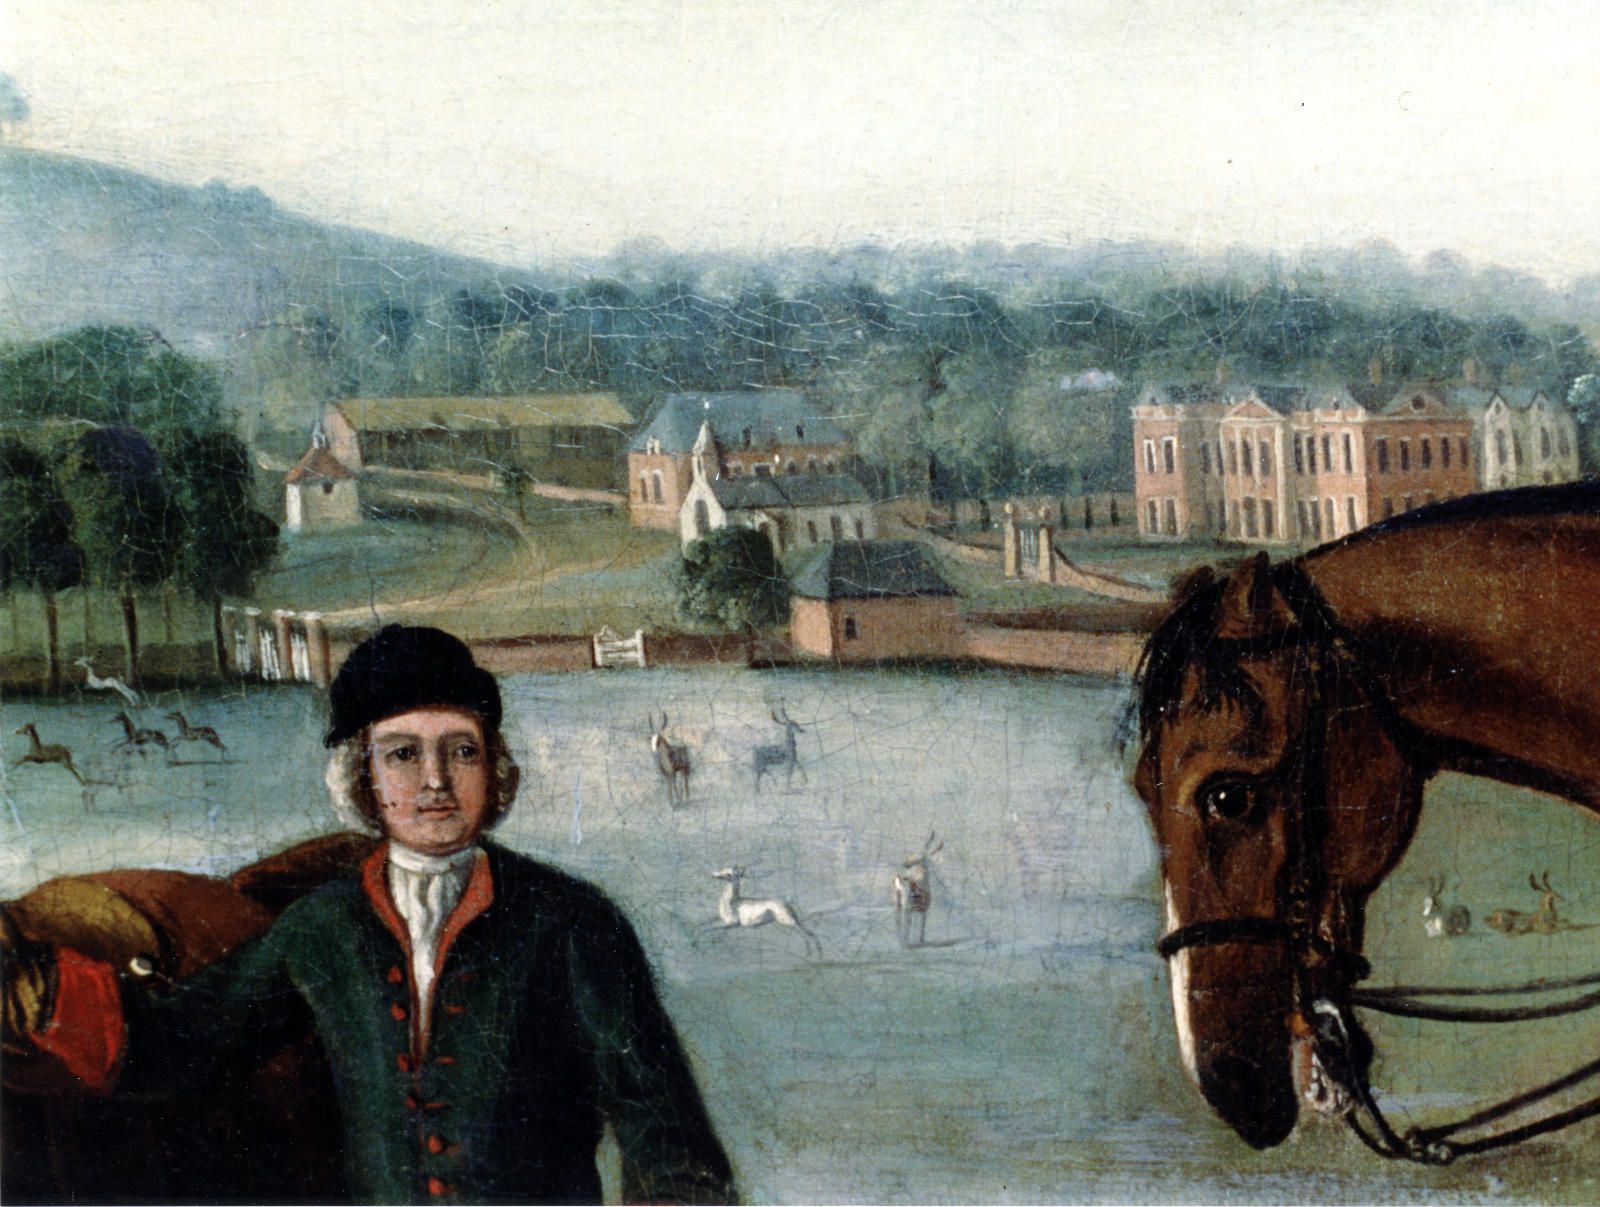 Fig.-1-Detail-from-portrait-of-C.-W.-Bampfylde-by-J.-Wootton-c.1740-showing-the-Hestercombe-House-chapel-background-centre